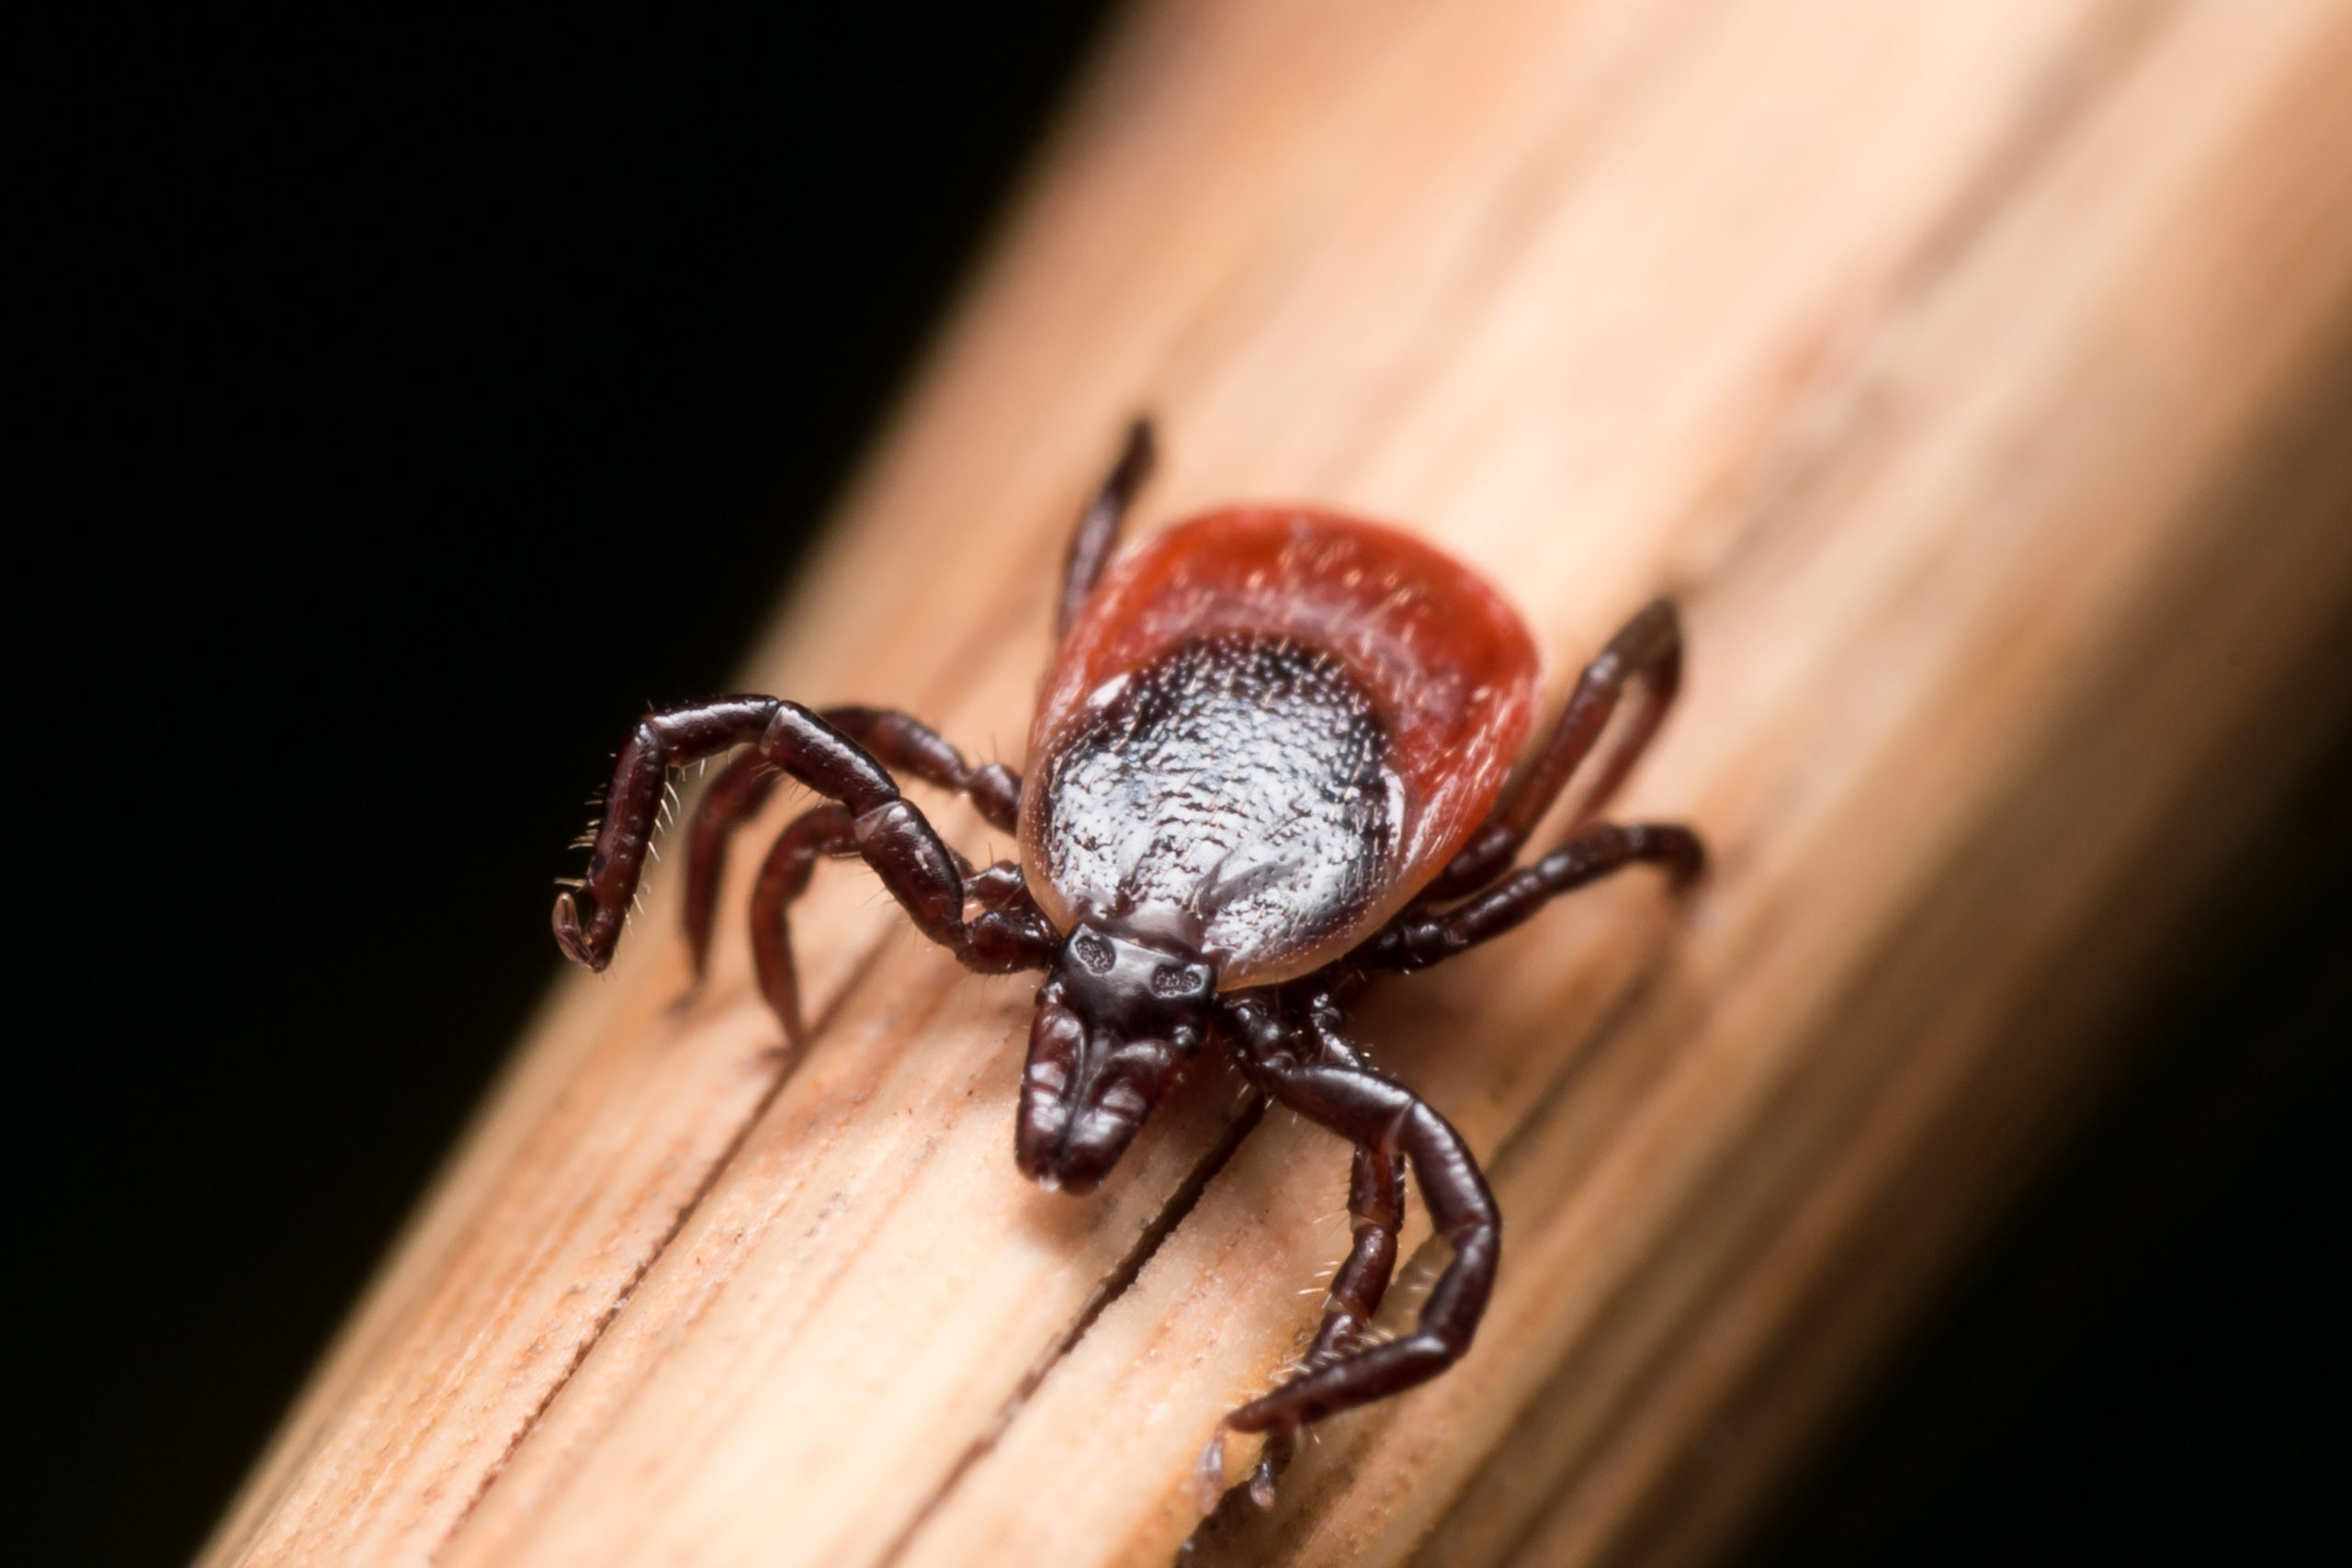 Close,Up,Photo,Of,Adult,Female,Deer,Tick,Crawling,On